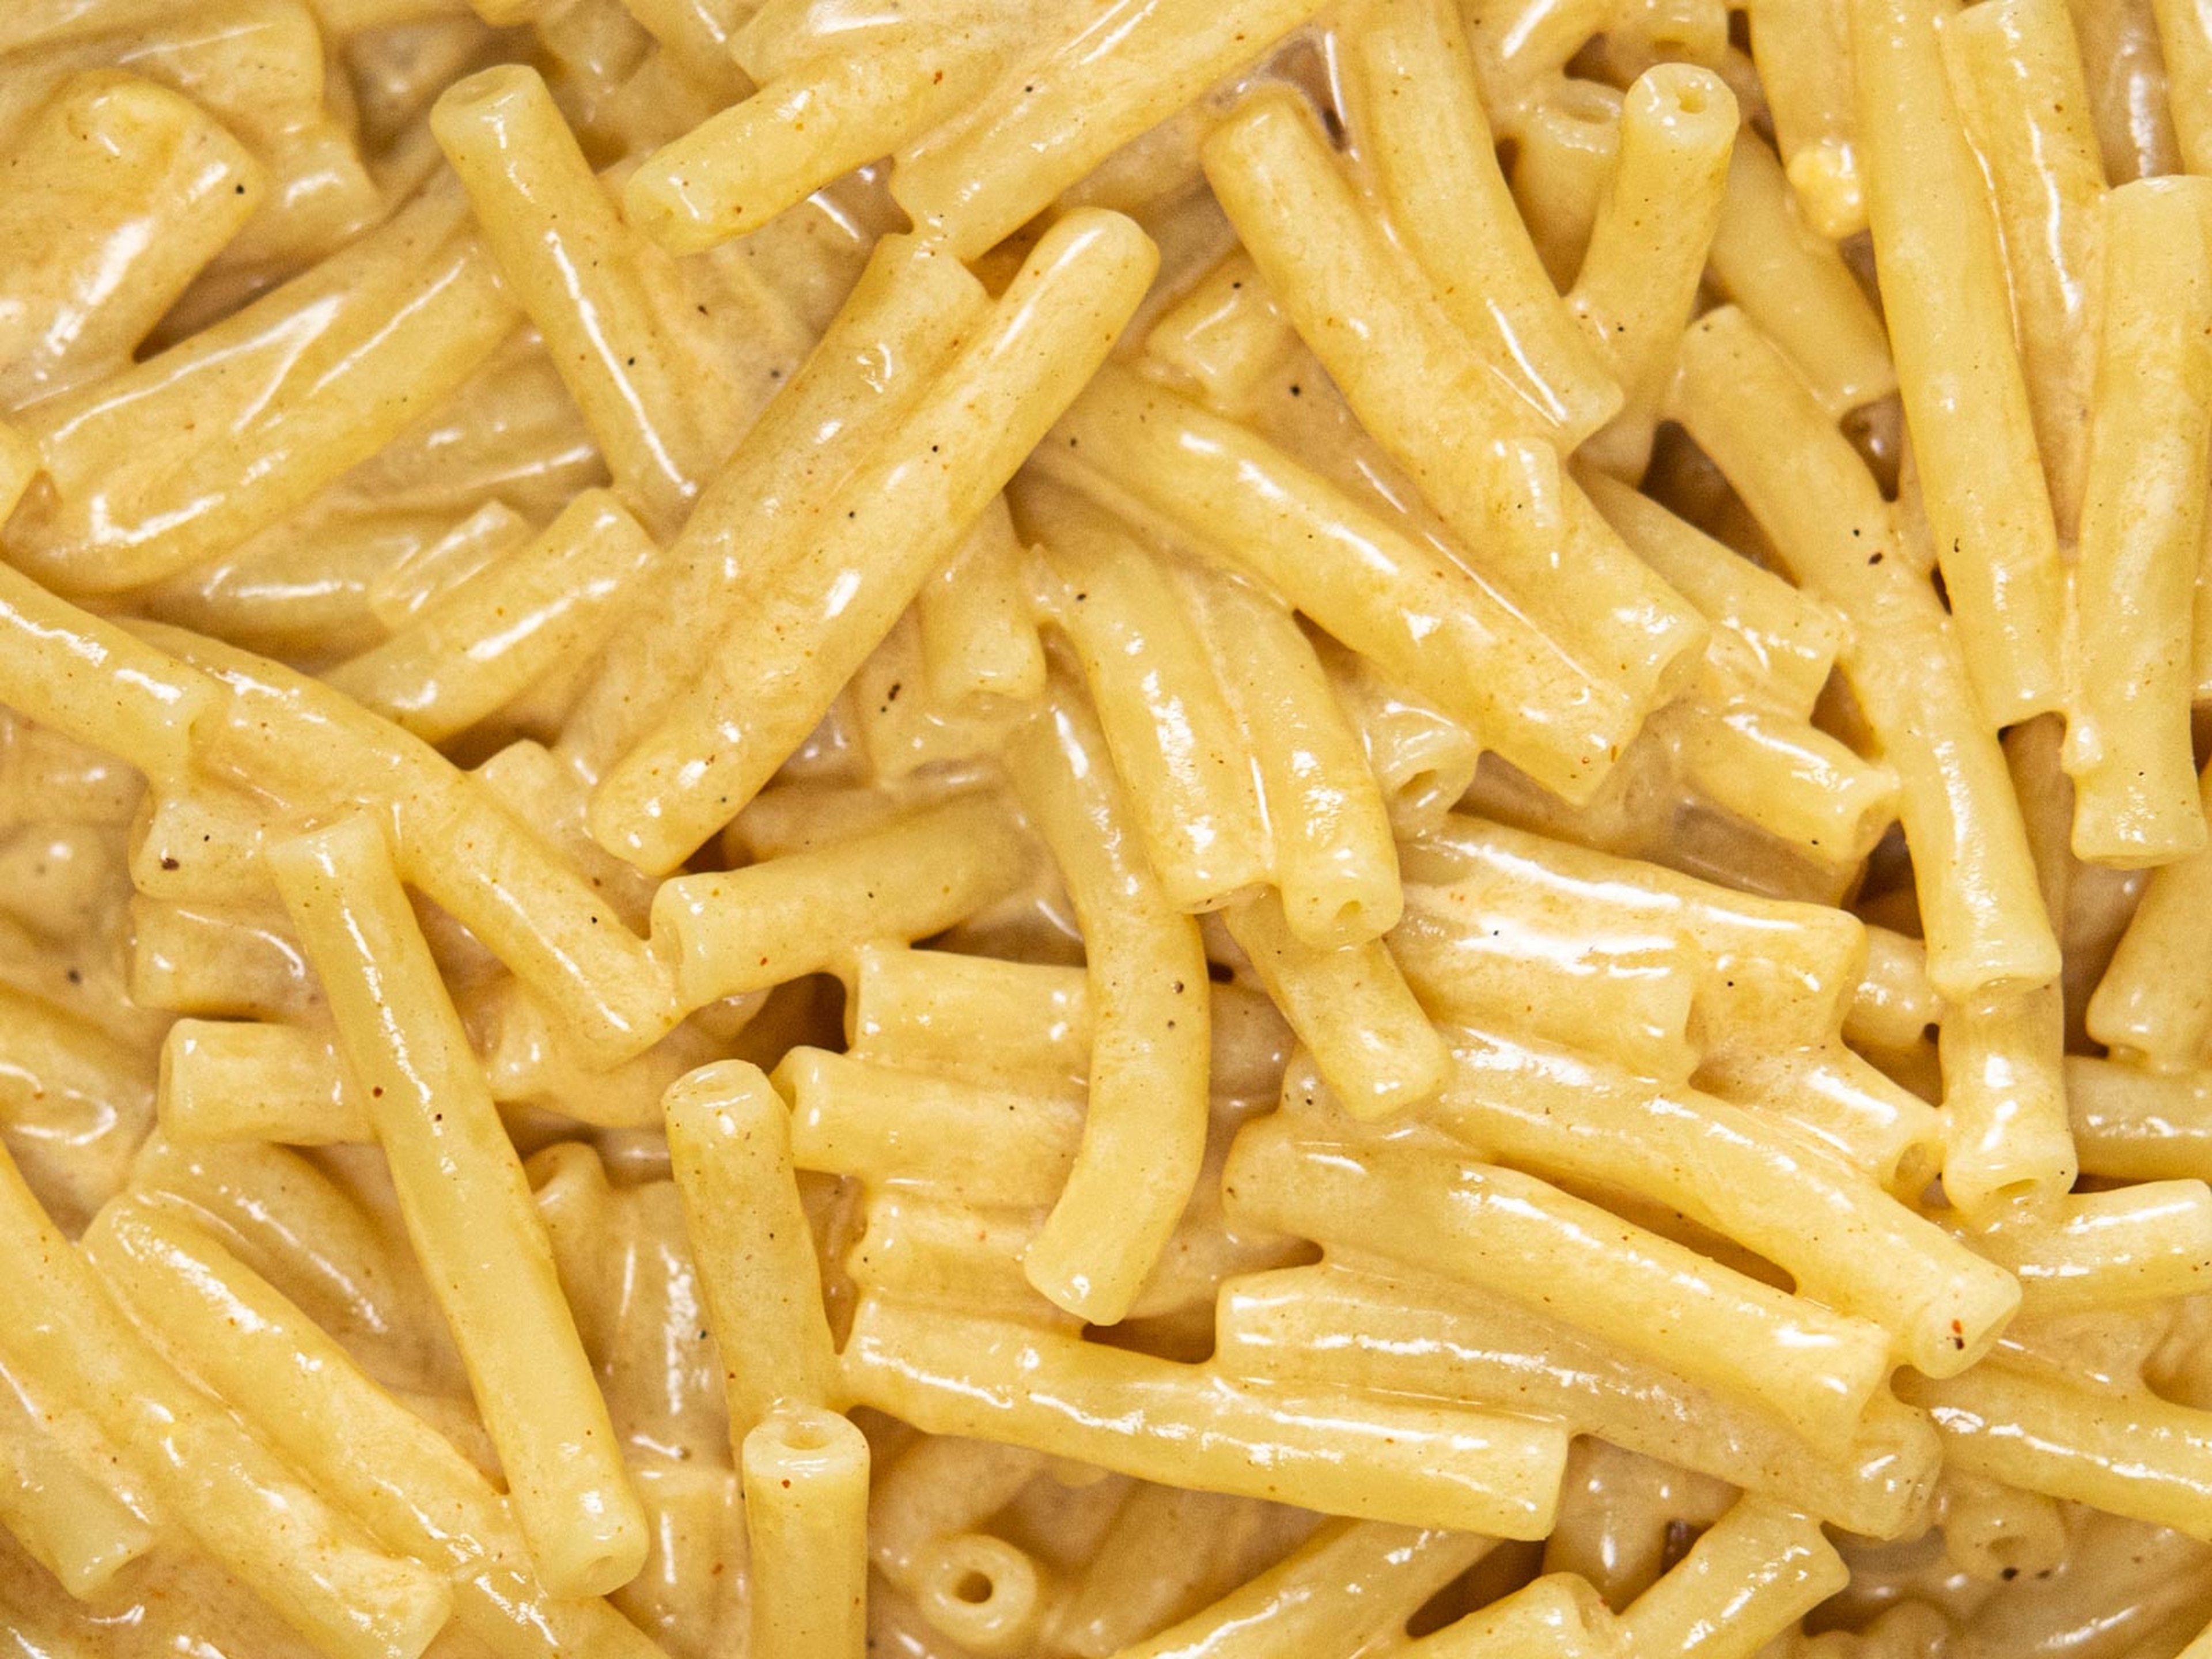 A Chef Makes Macaroni and Cheese